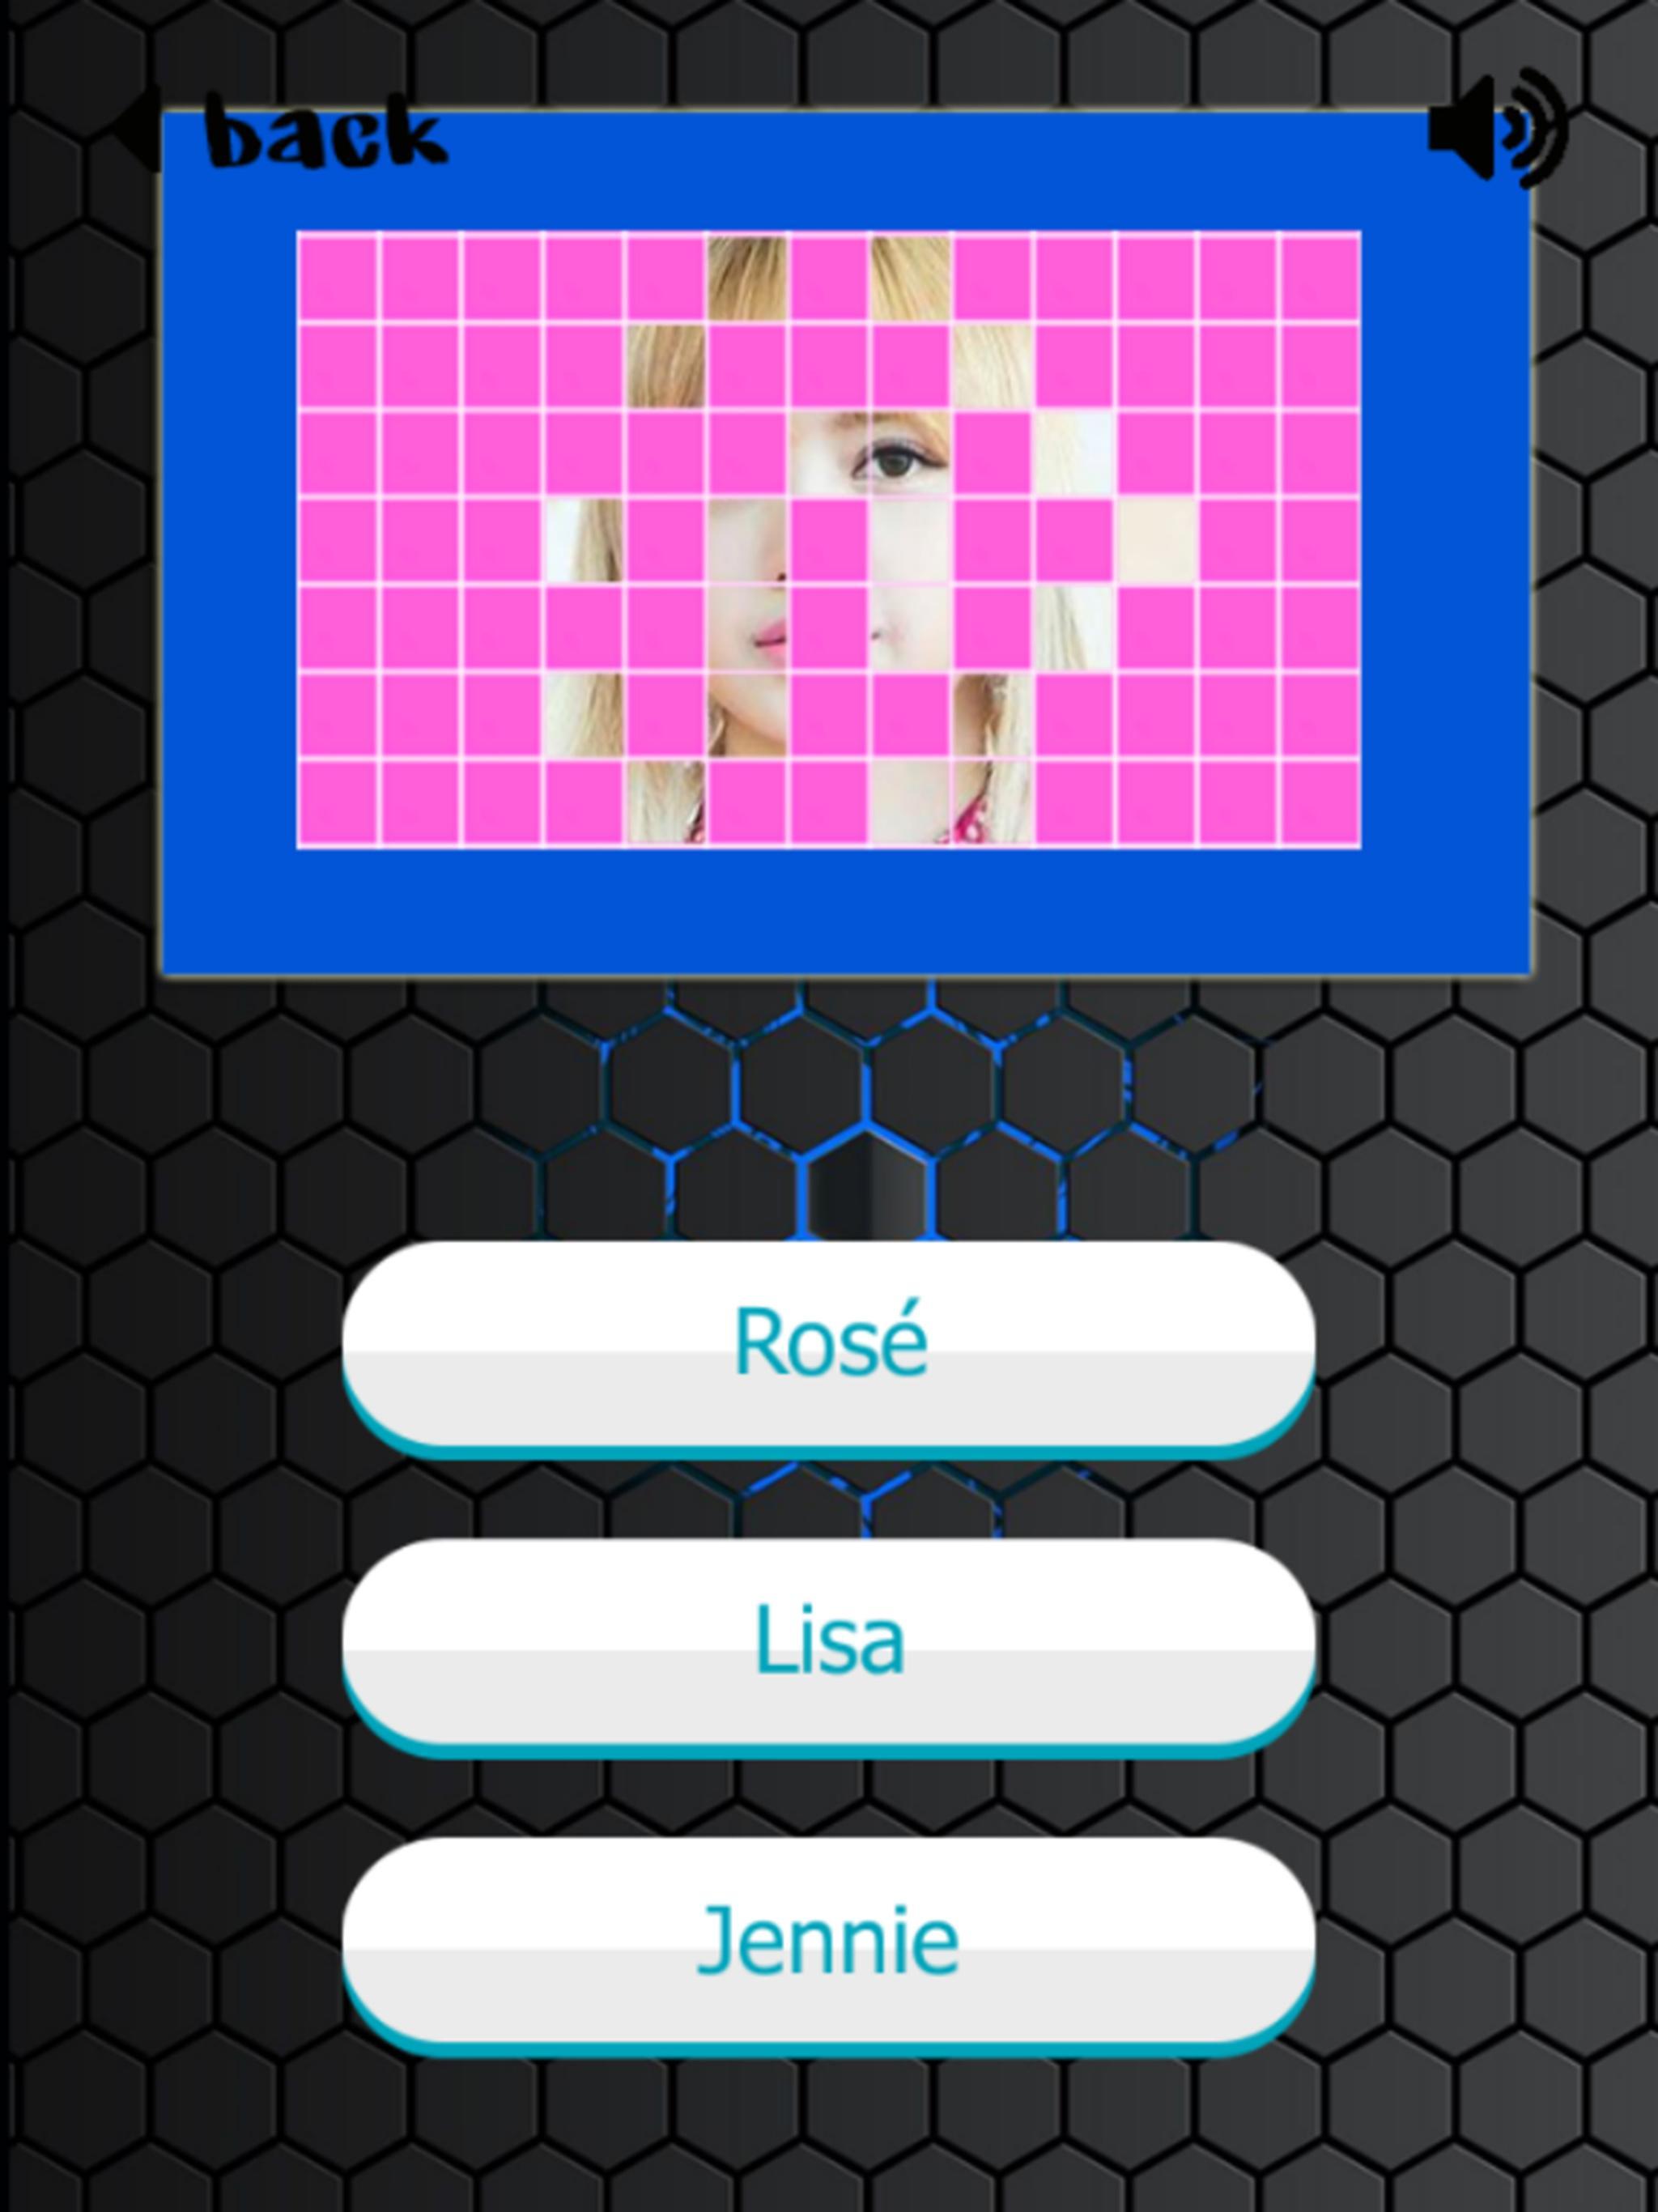 Name Blackpink Idol K Pop Girl Group Quiz For Android Apk - cool names for three girls group